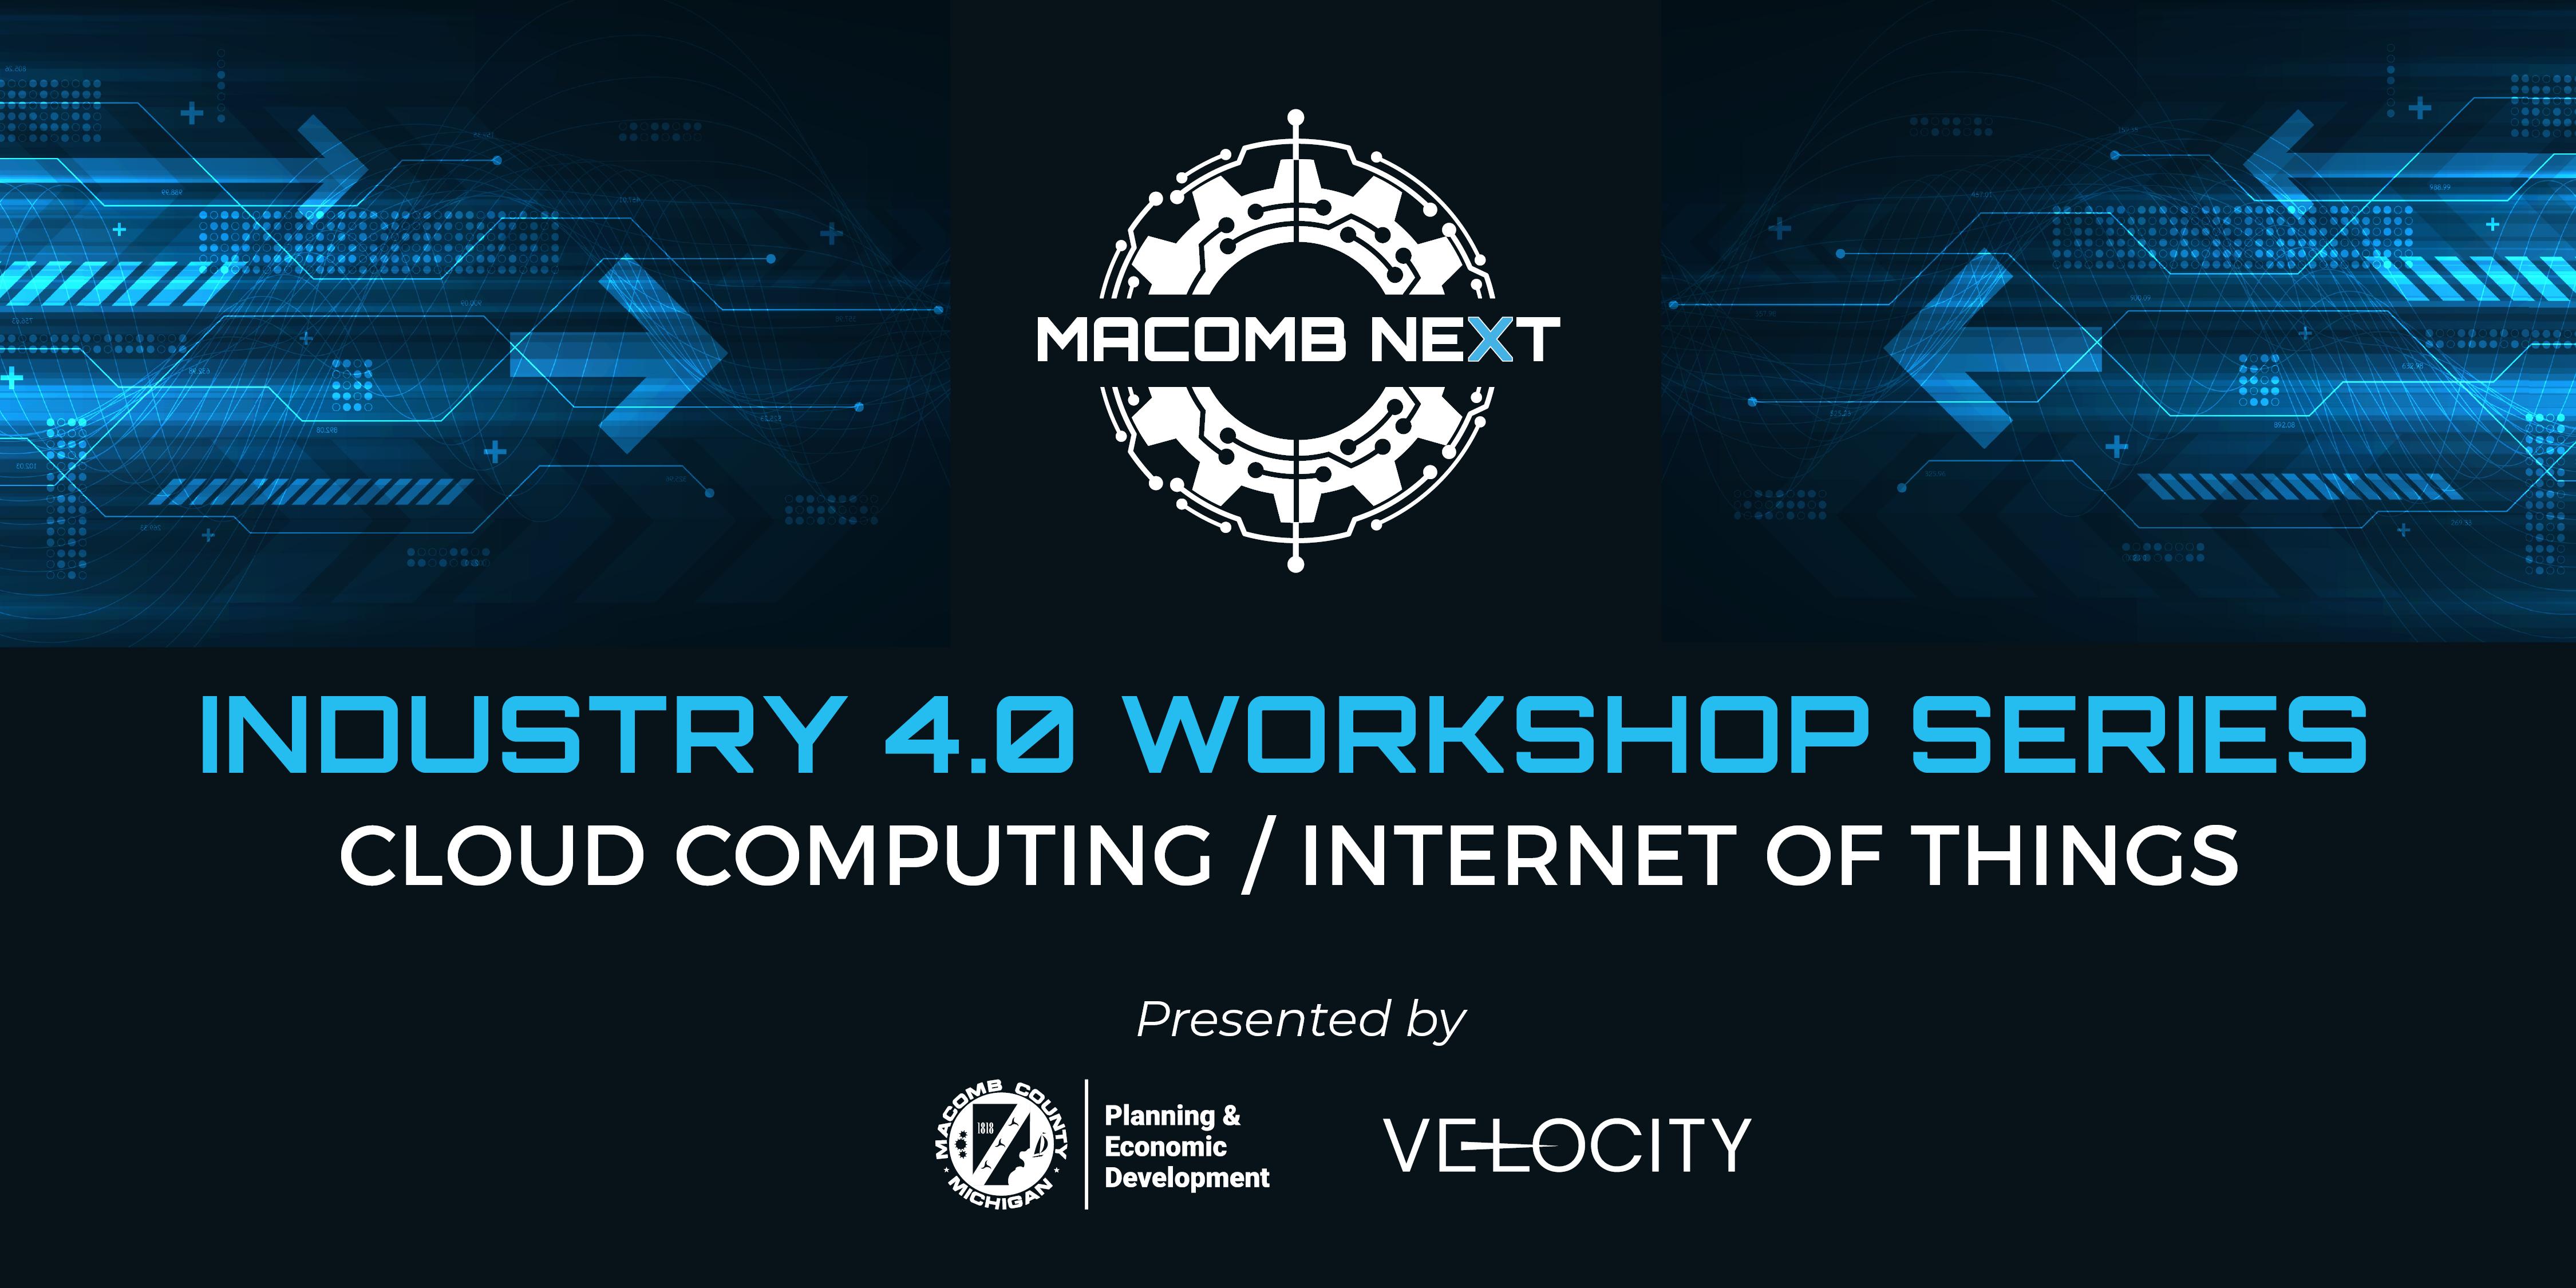 Industry 4.0 Macomb Next Workshop - Cloud Computing and the Internet of Things